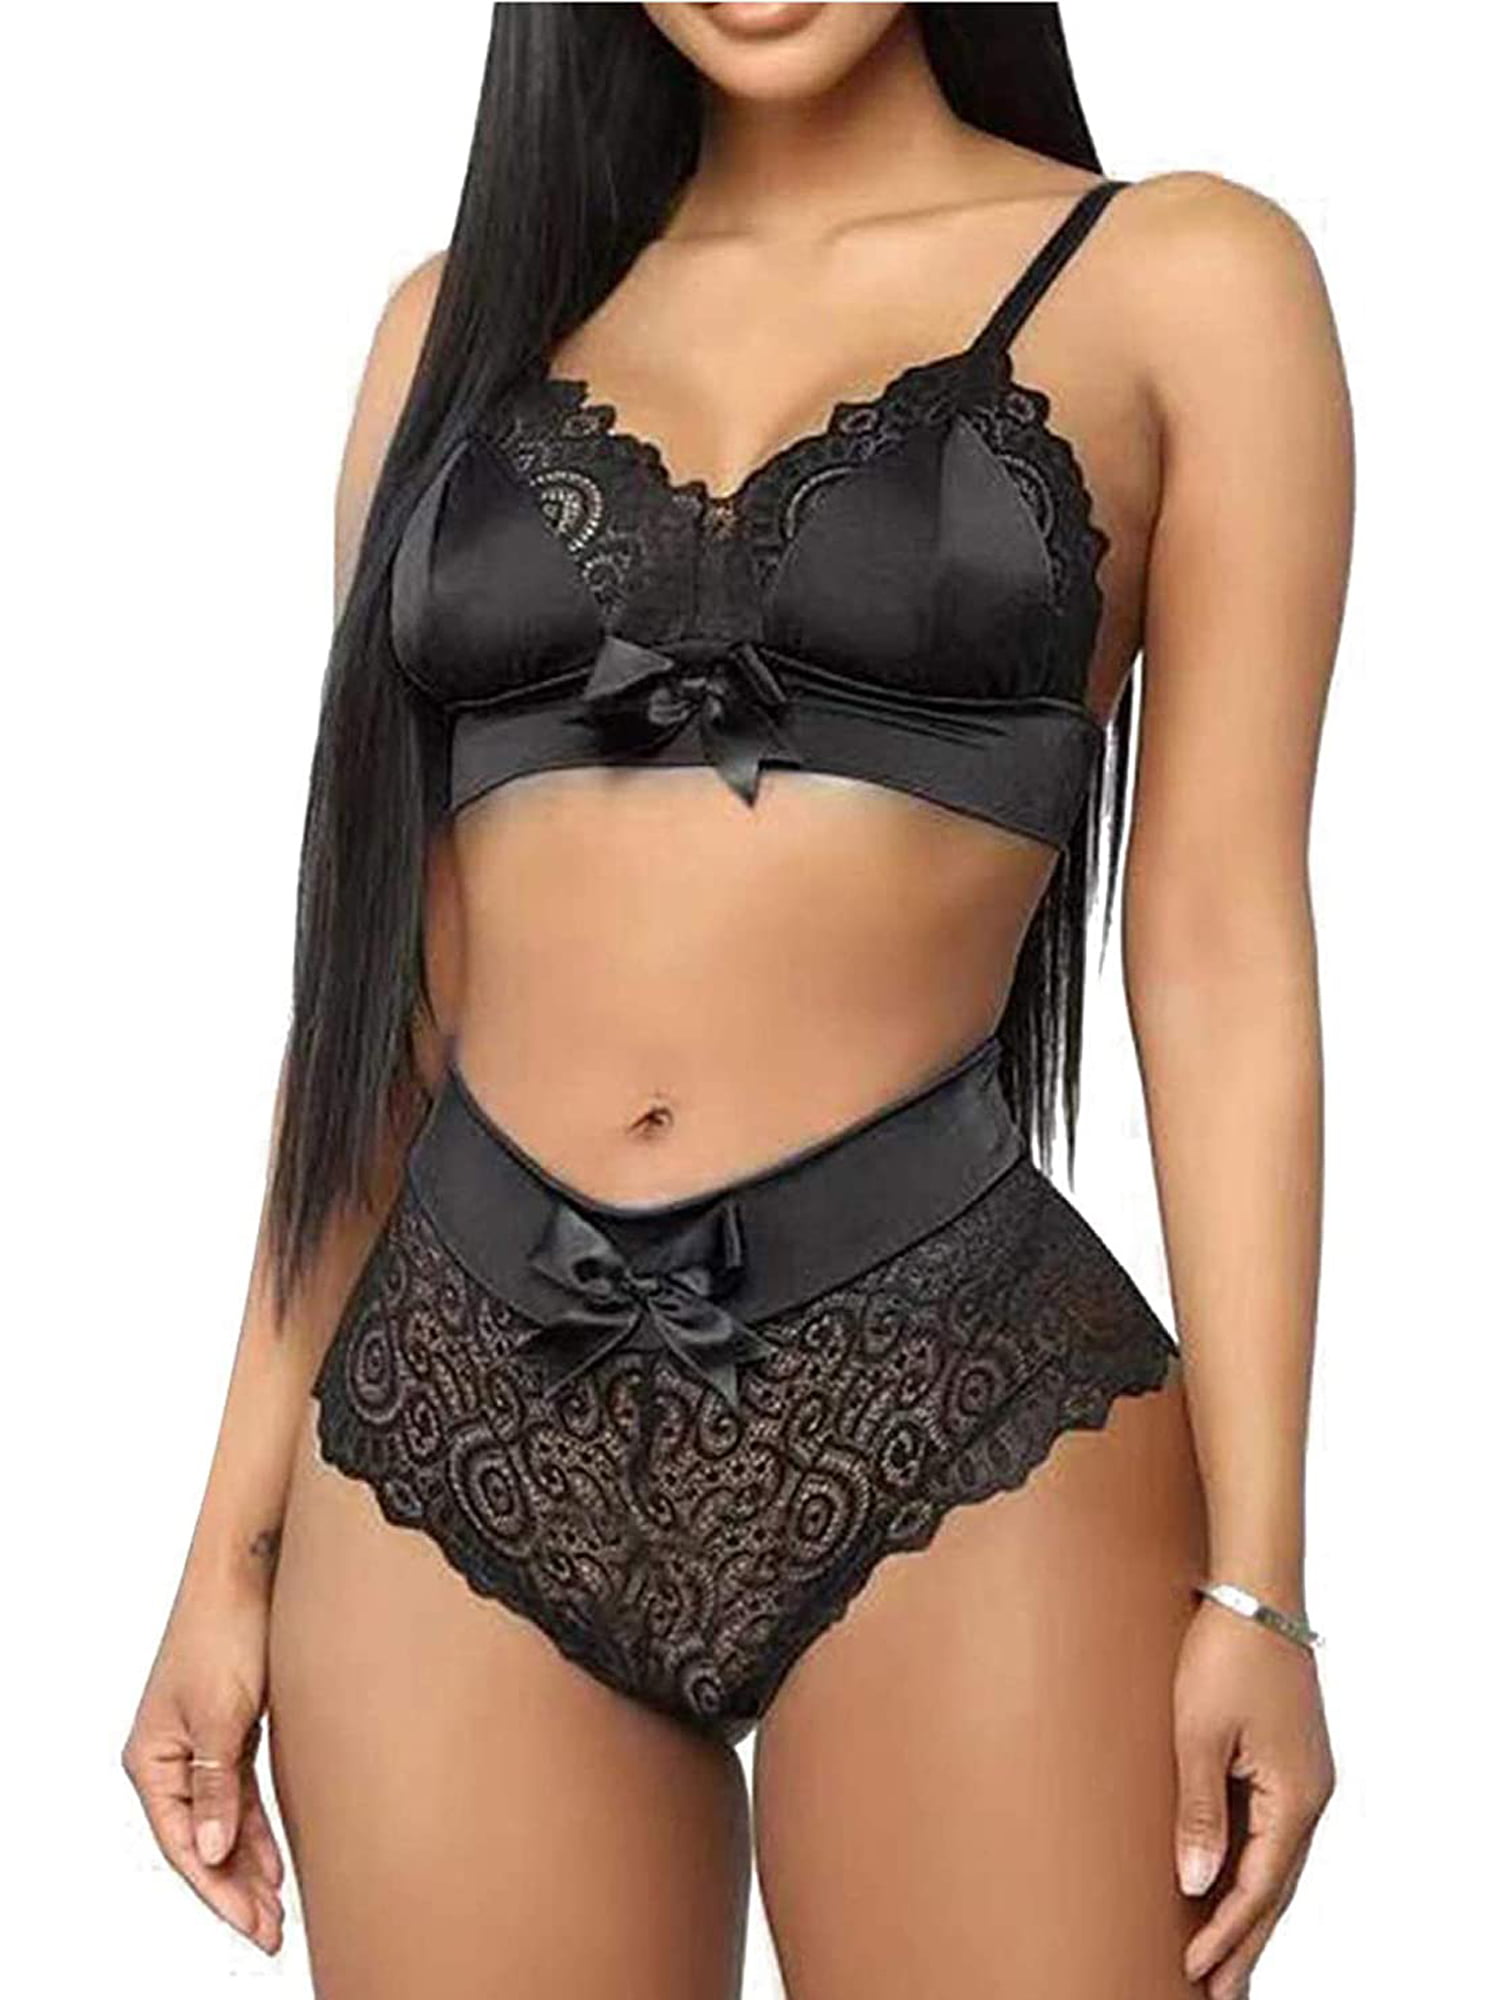  Underwear Lace See Through Bra Lingerie Set Looming